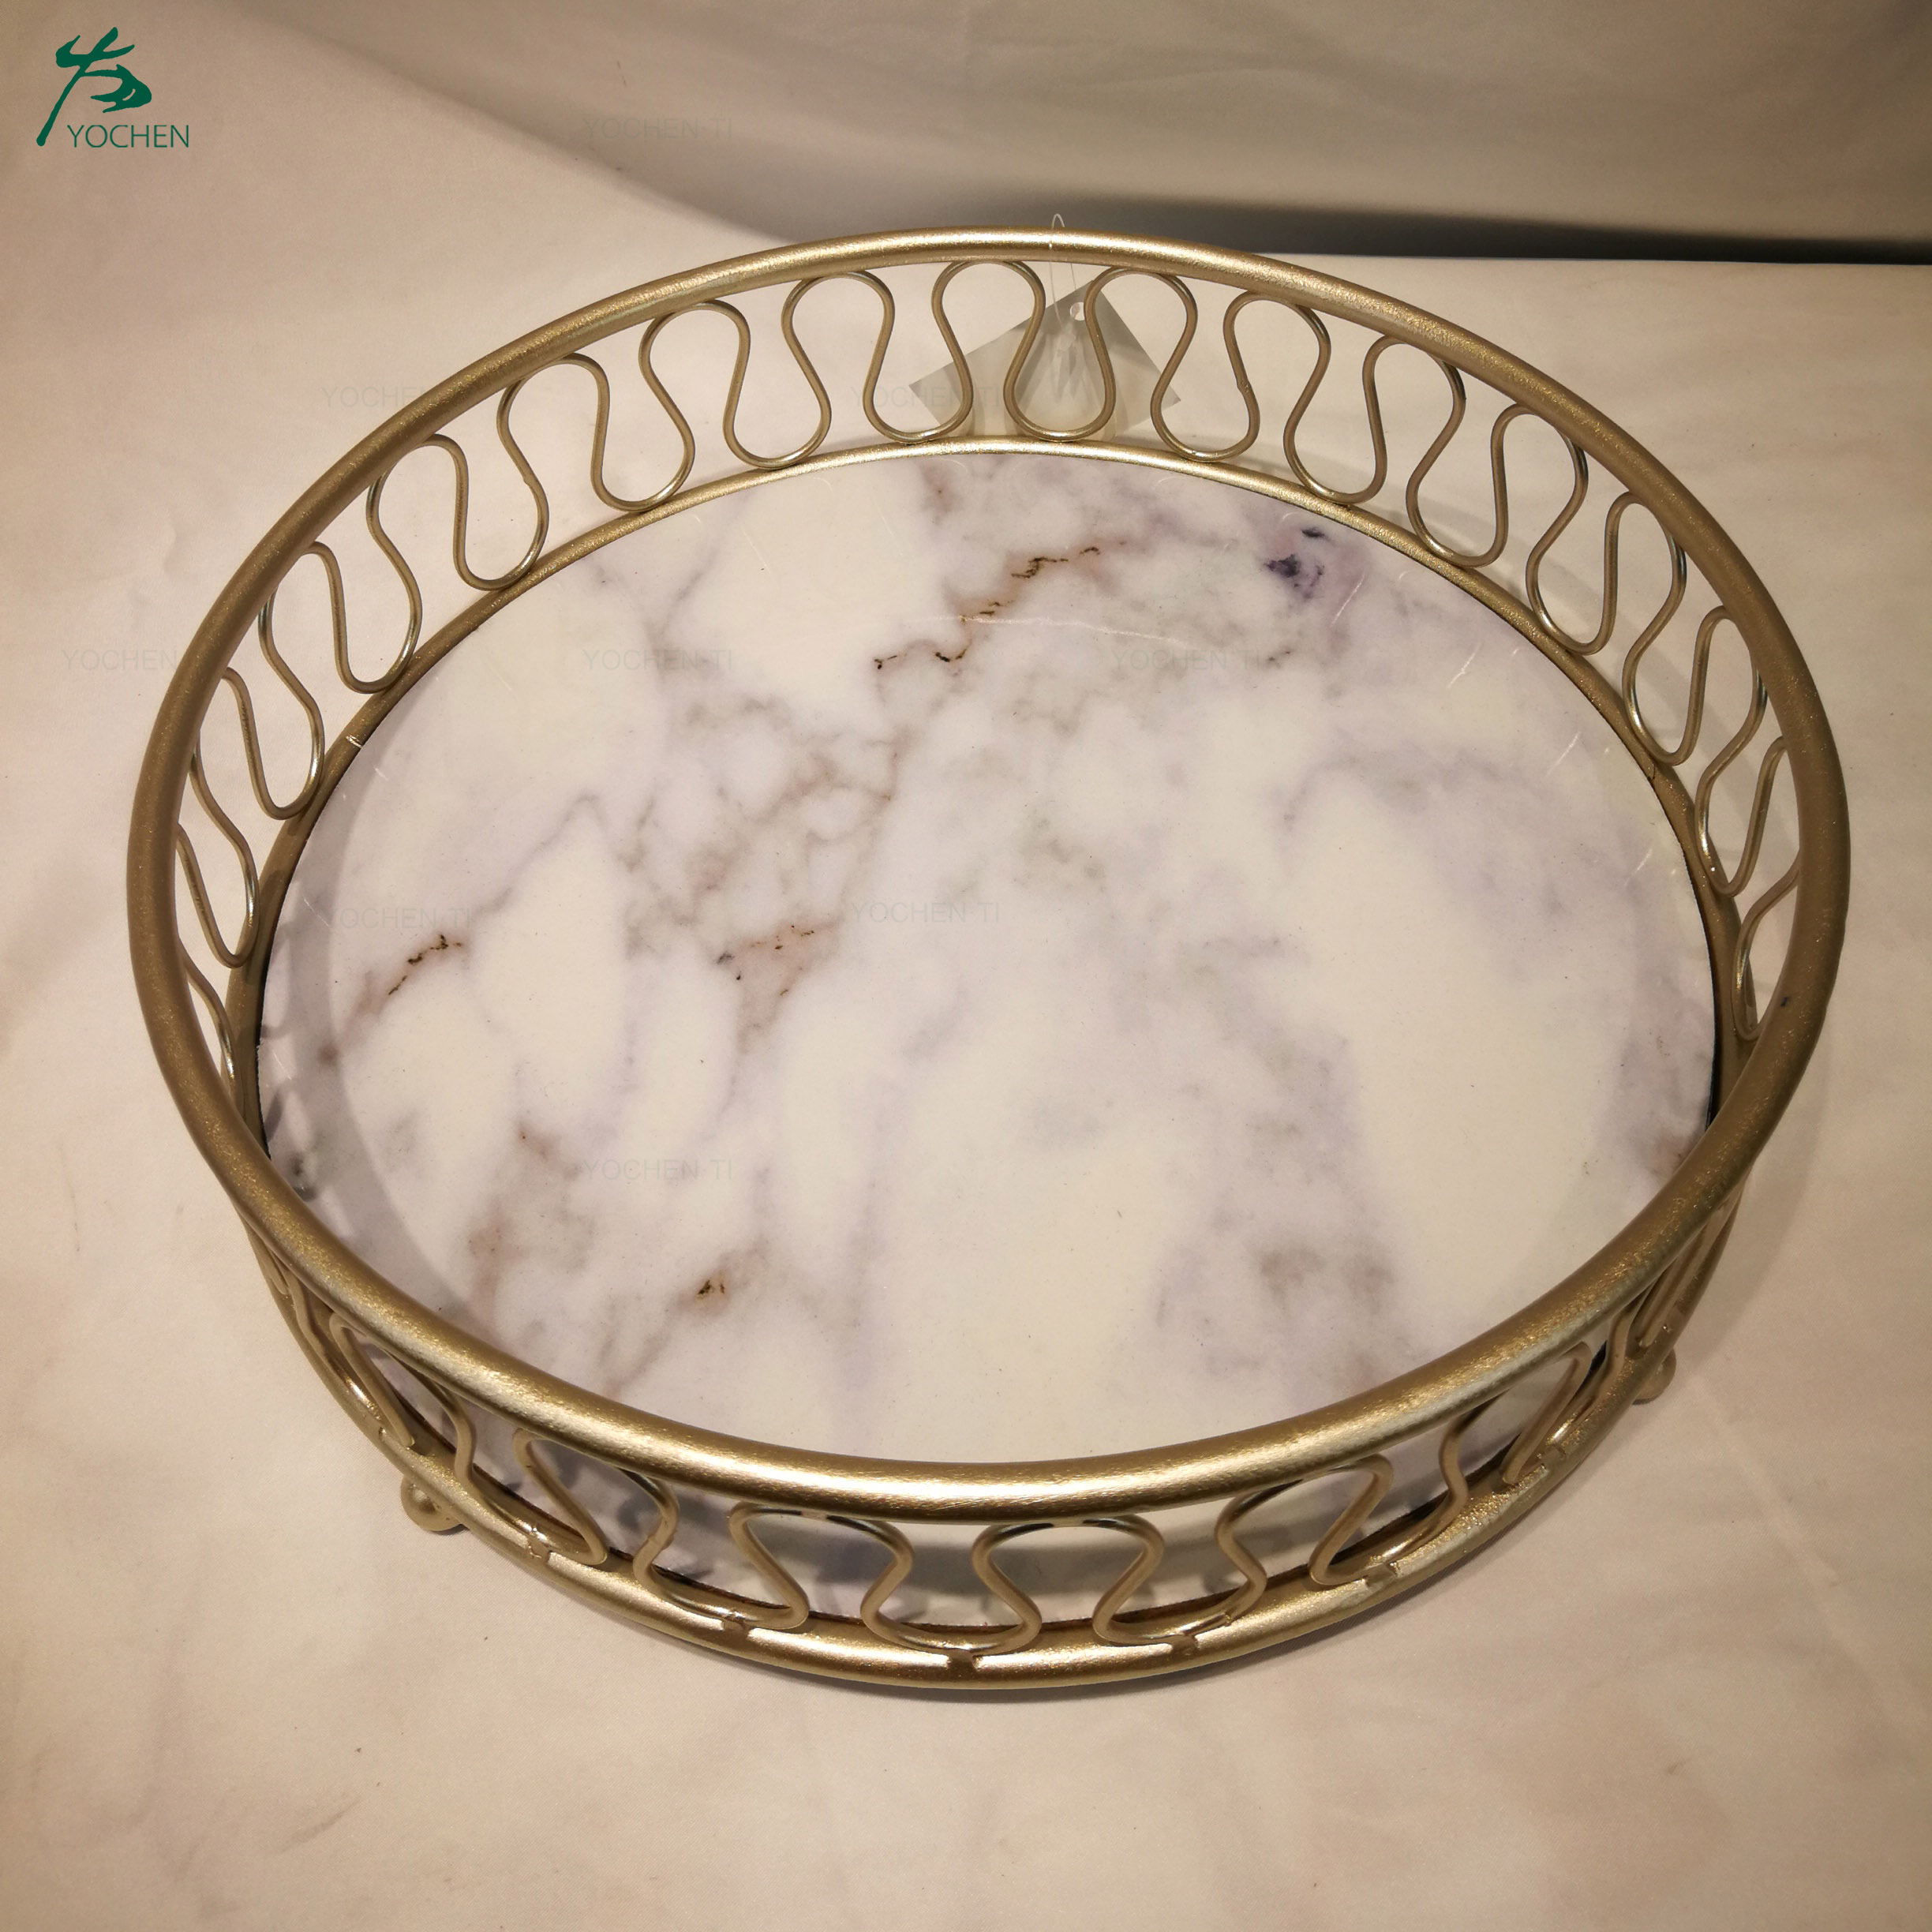 Luxury natural with metal frame chassis storage tray dessert plate desktop ornaments marble tray